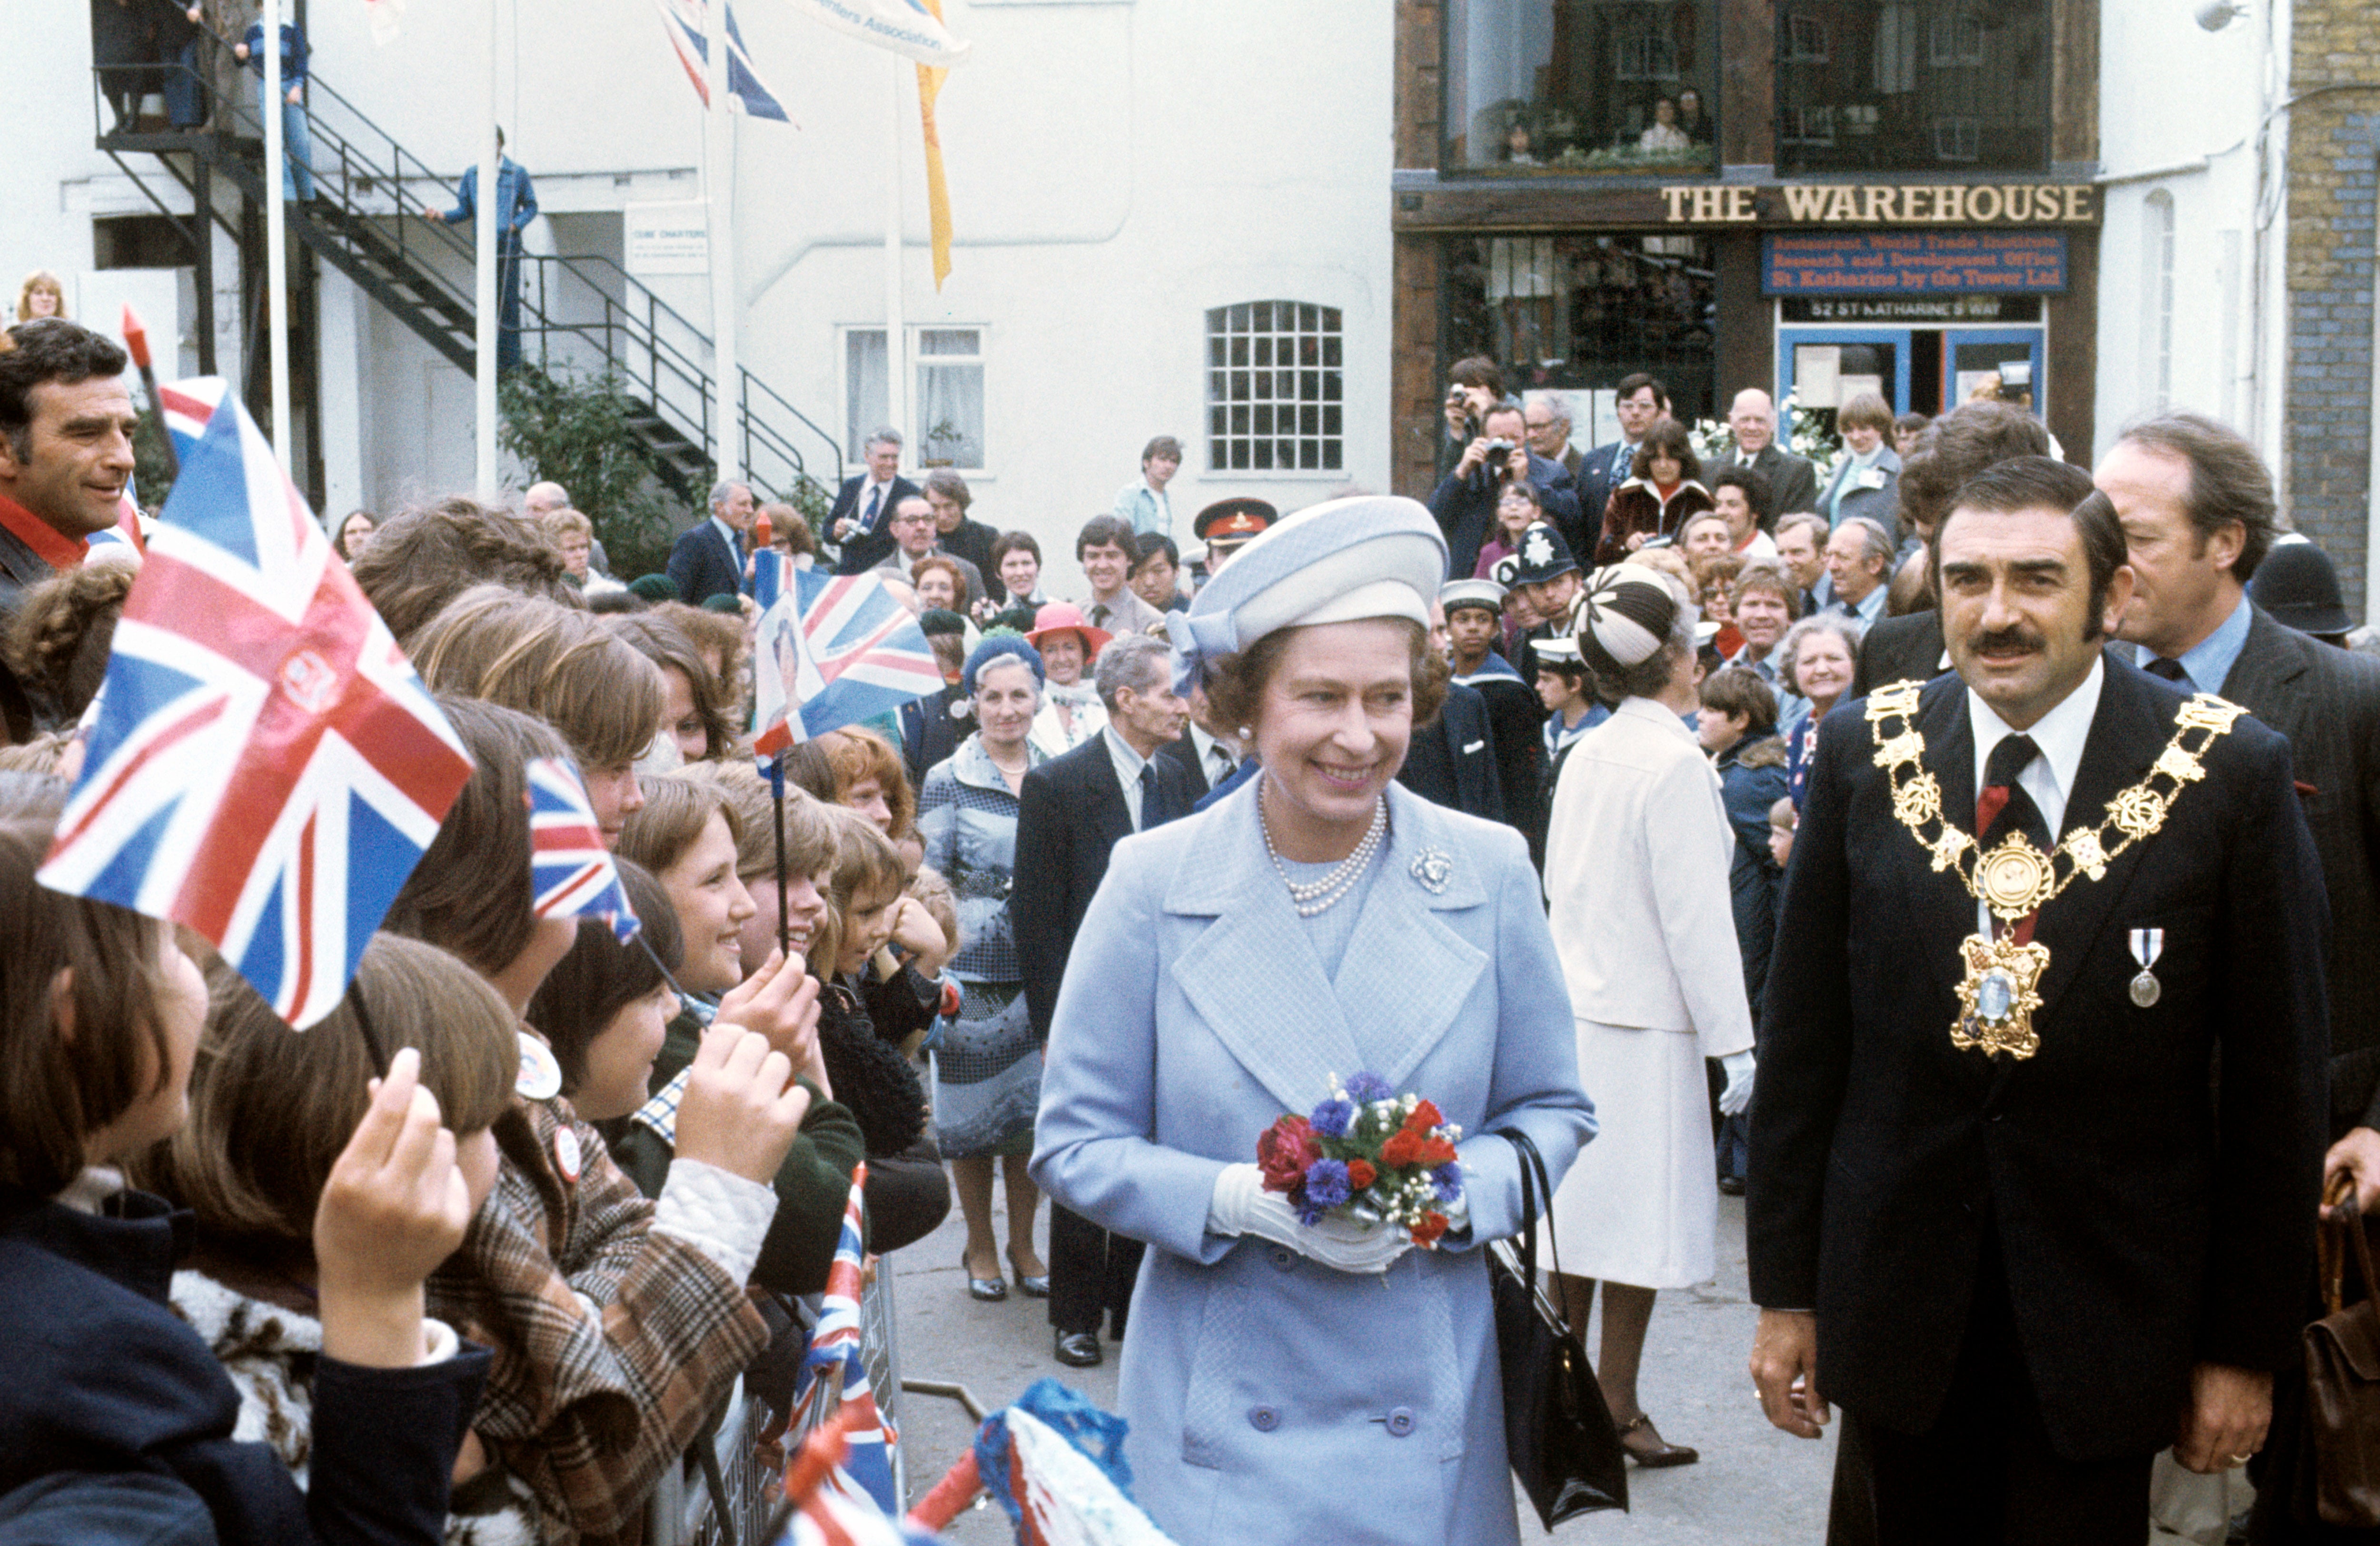 The Queen meets an enthusiastic crowd at St Katherine’s Dock near the Tower of London, one of the stops on her Silver Jubilee river progress (PA)